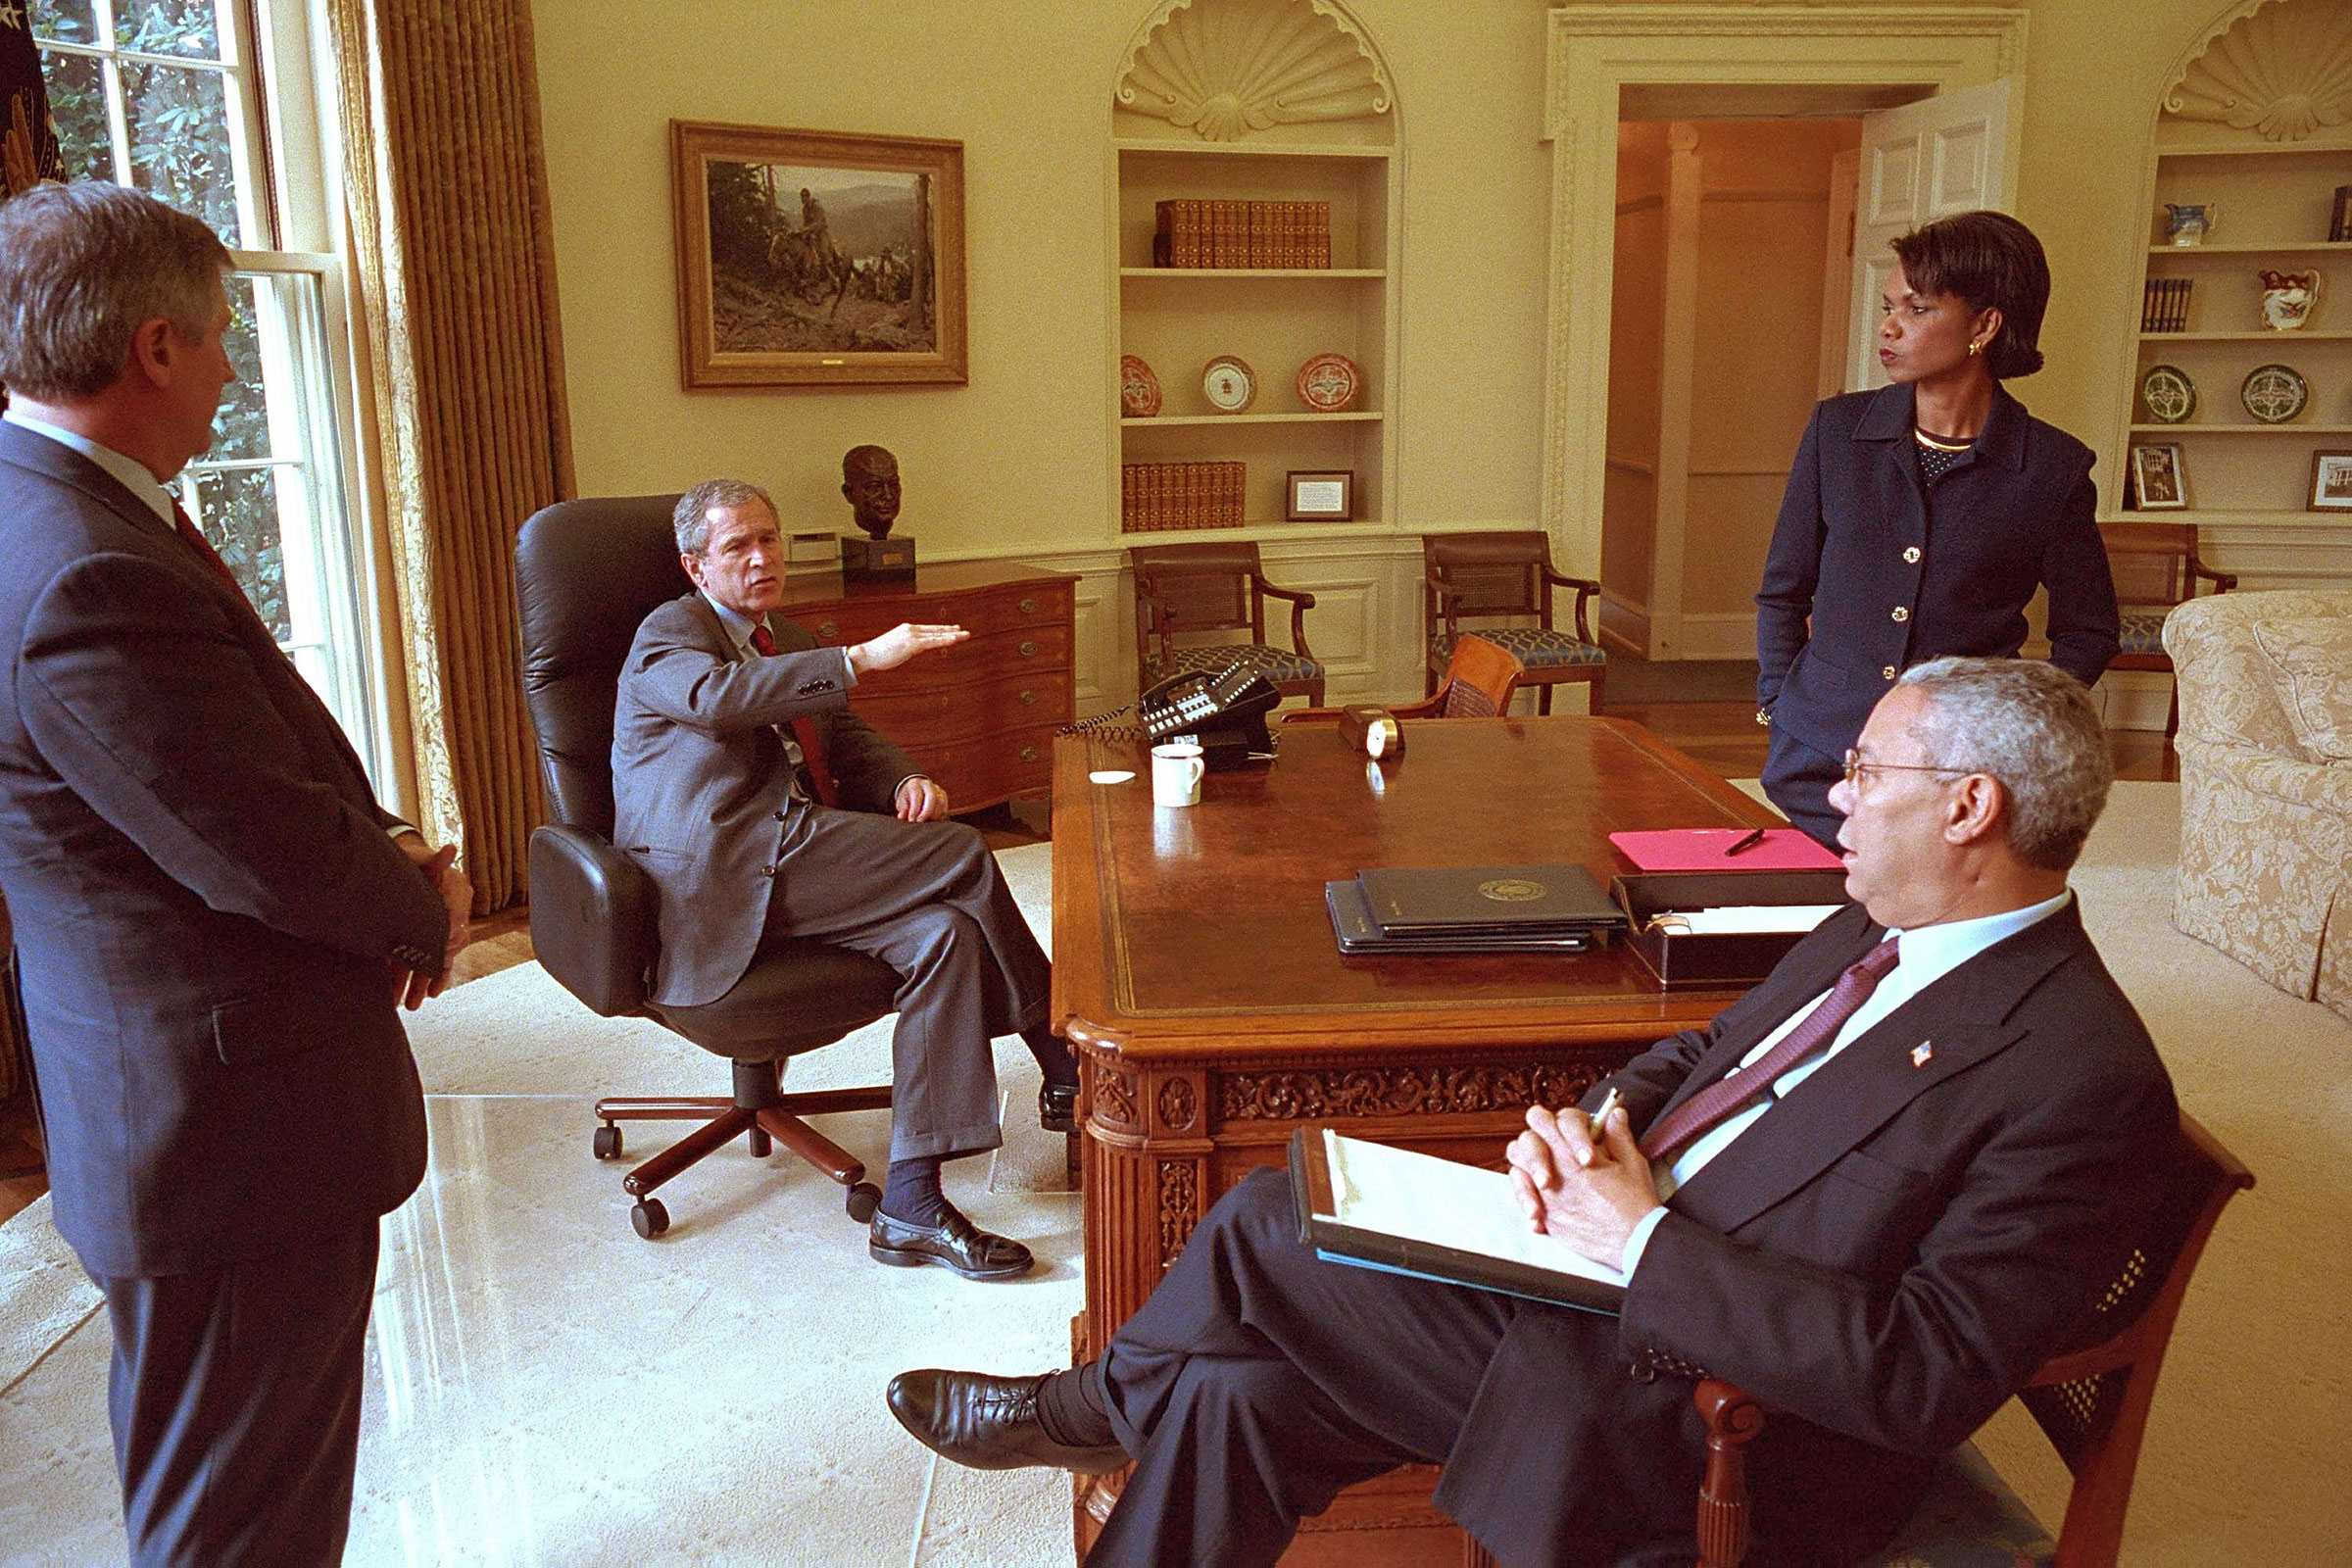 President George W. Bush meets with Chief of Staff Andy Card, Secretary of State Colin Powell, and National Security Advisor Condoleezza Rice in the Oval Office, 2001. (Eric Draper—White House/Getty Images)